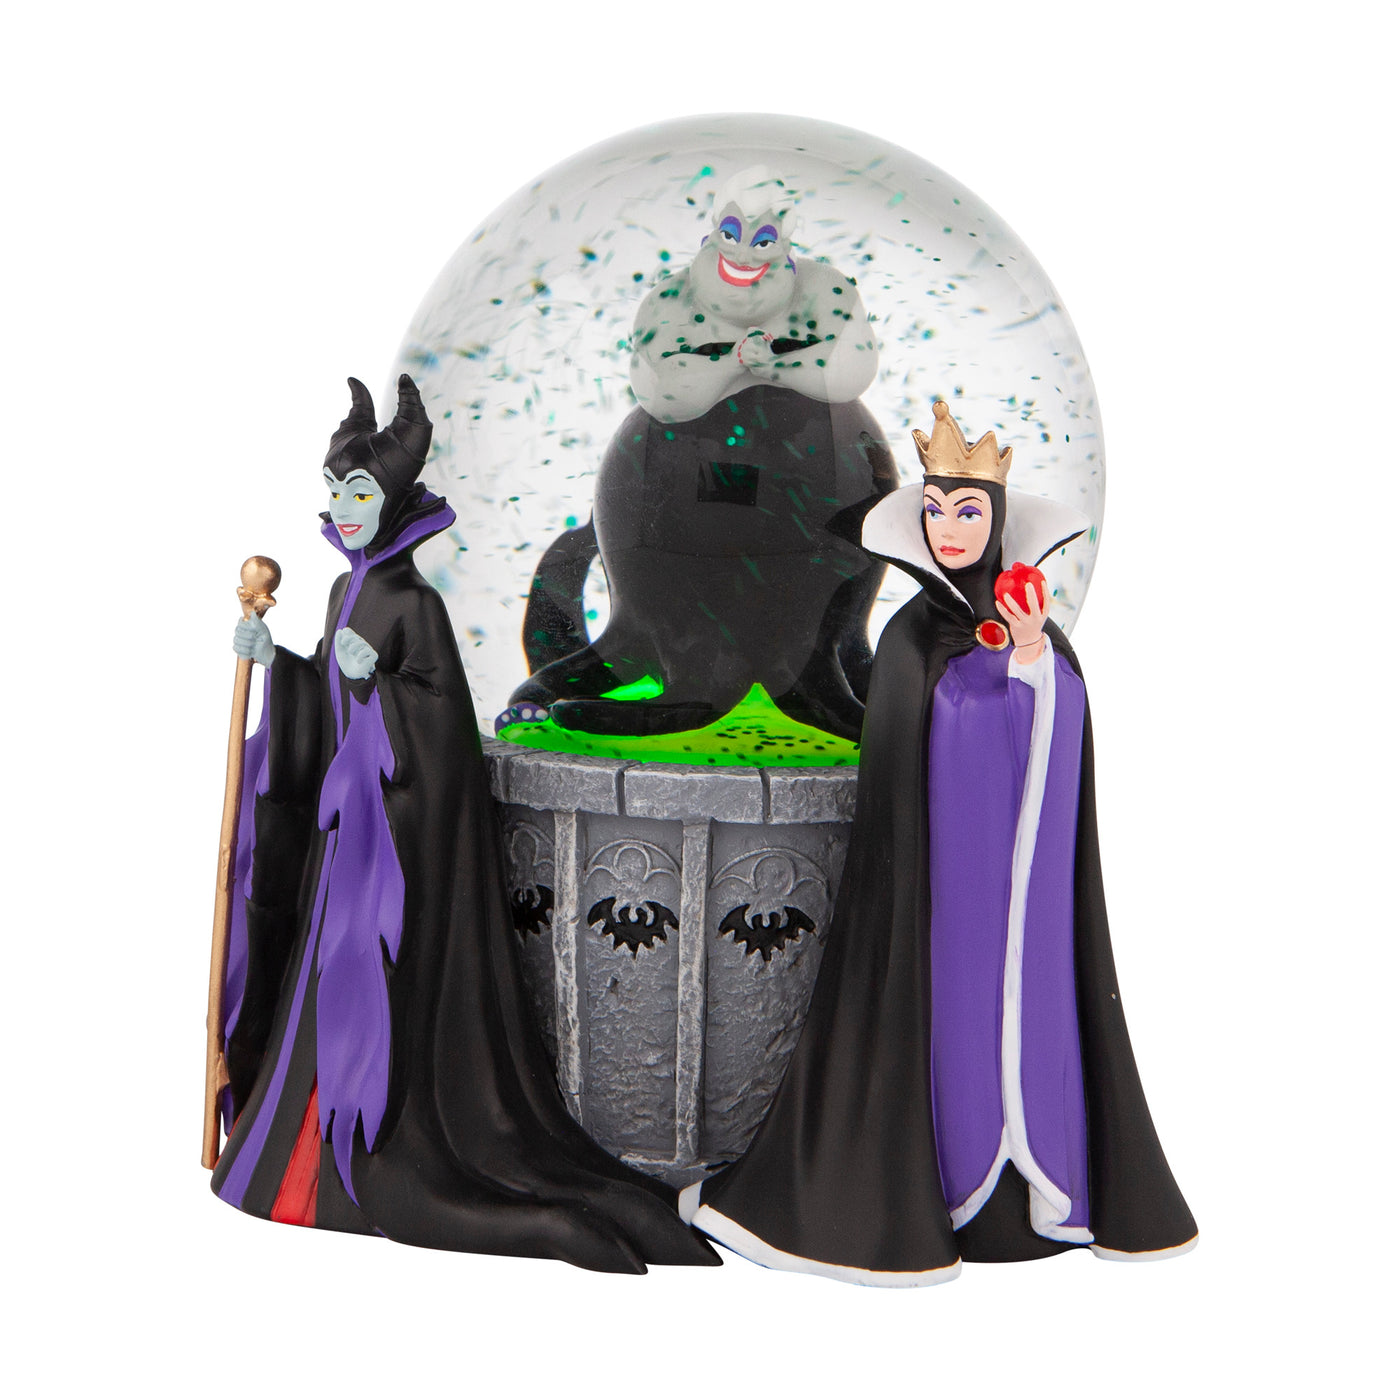 Disney Department 56 Villain Maleficent Ursula Evil Queen Waterball New with Box